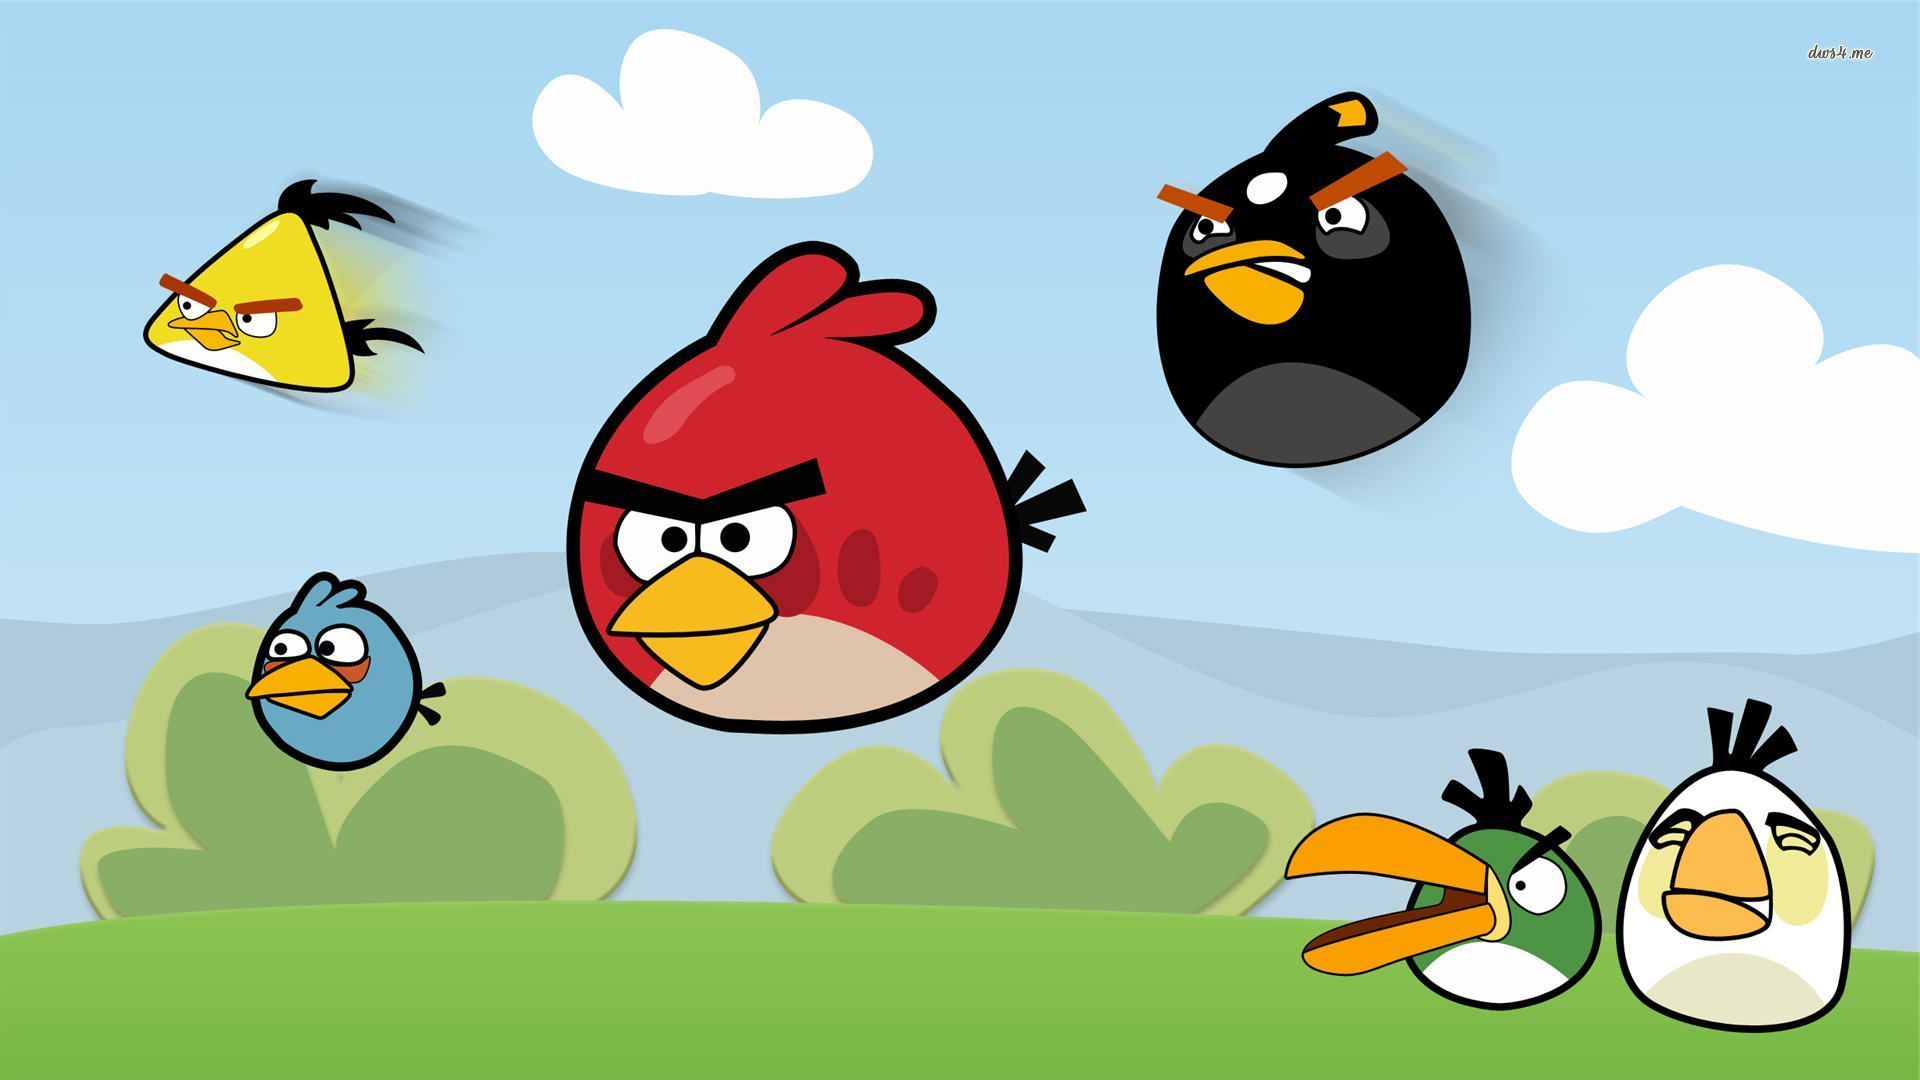 Angry Birds! - Pictures Collection Free Download - Mobogenie.com